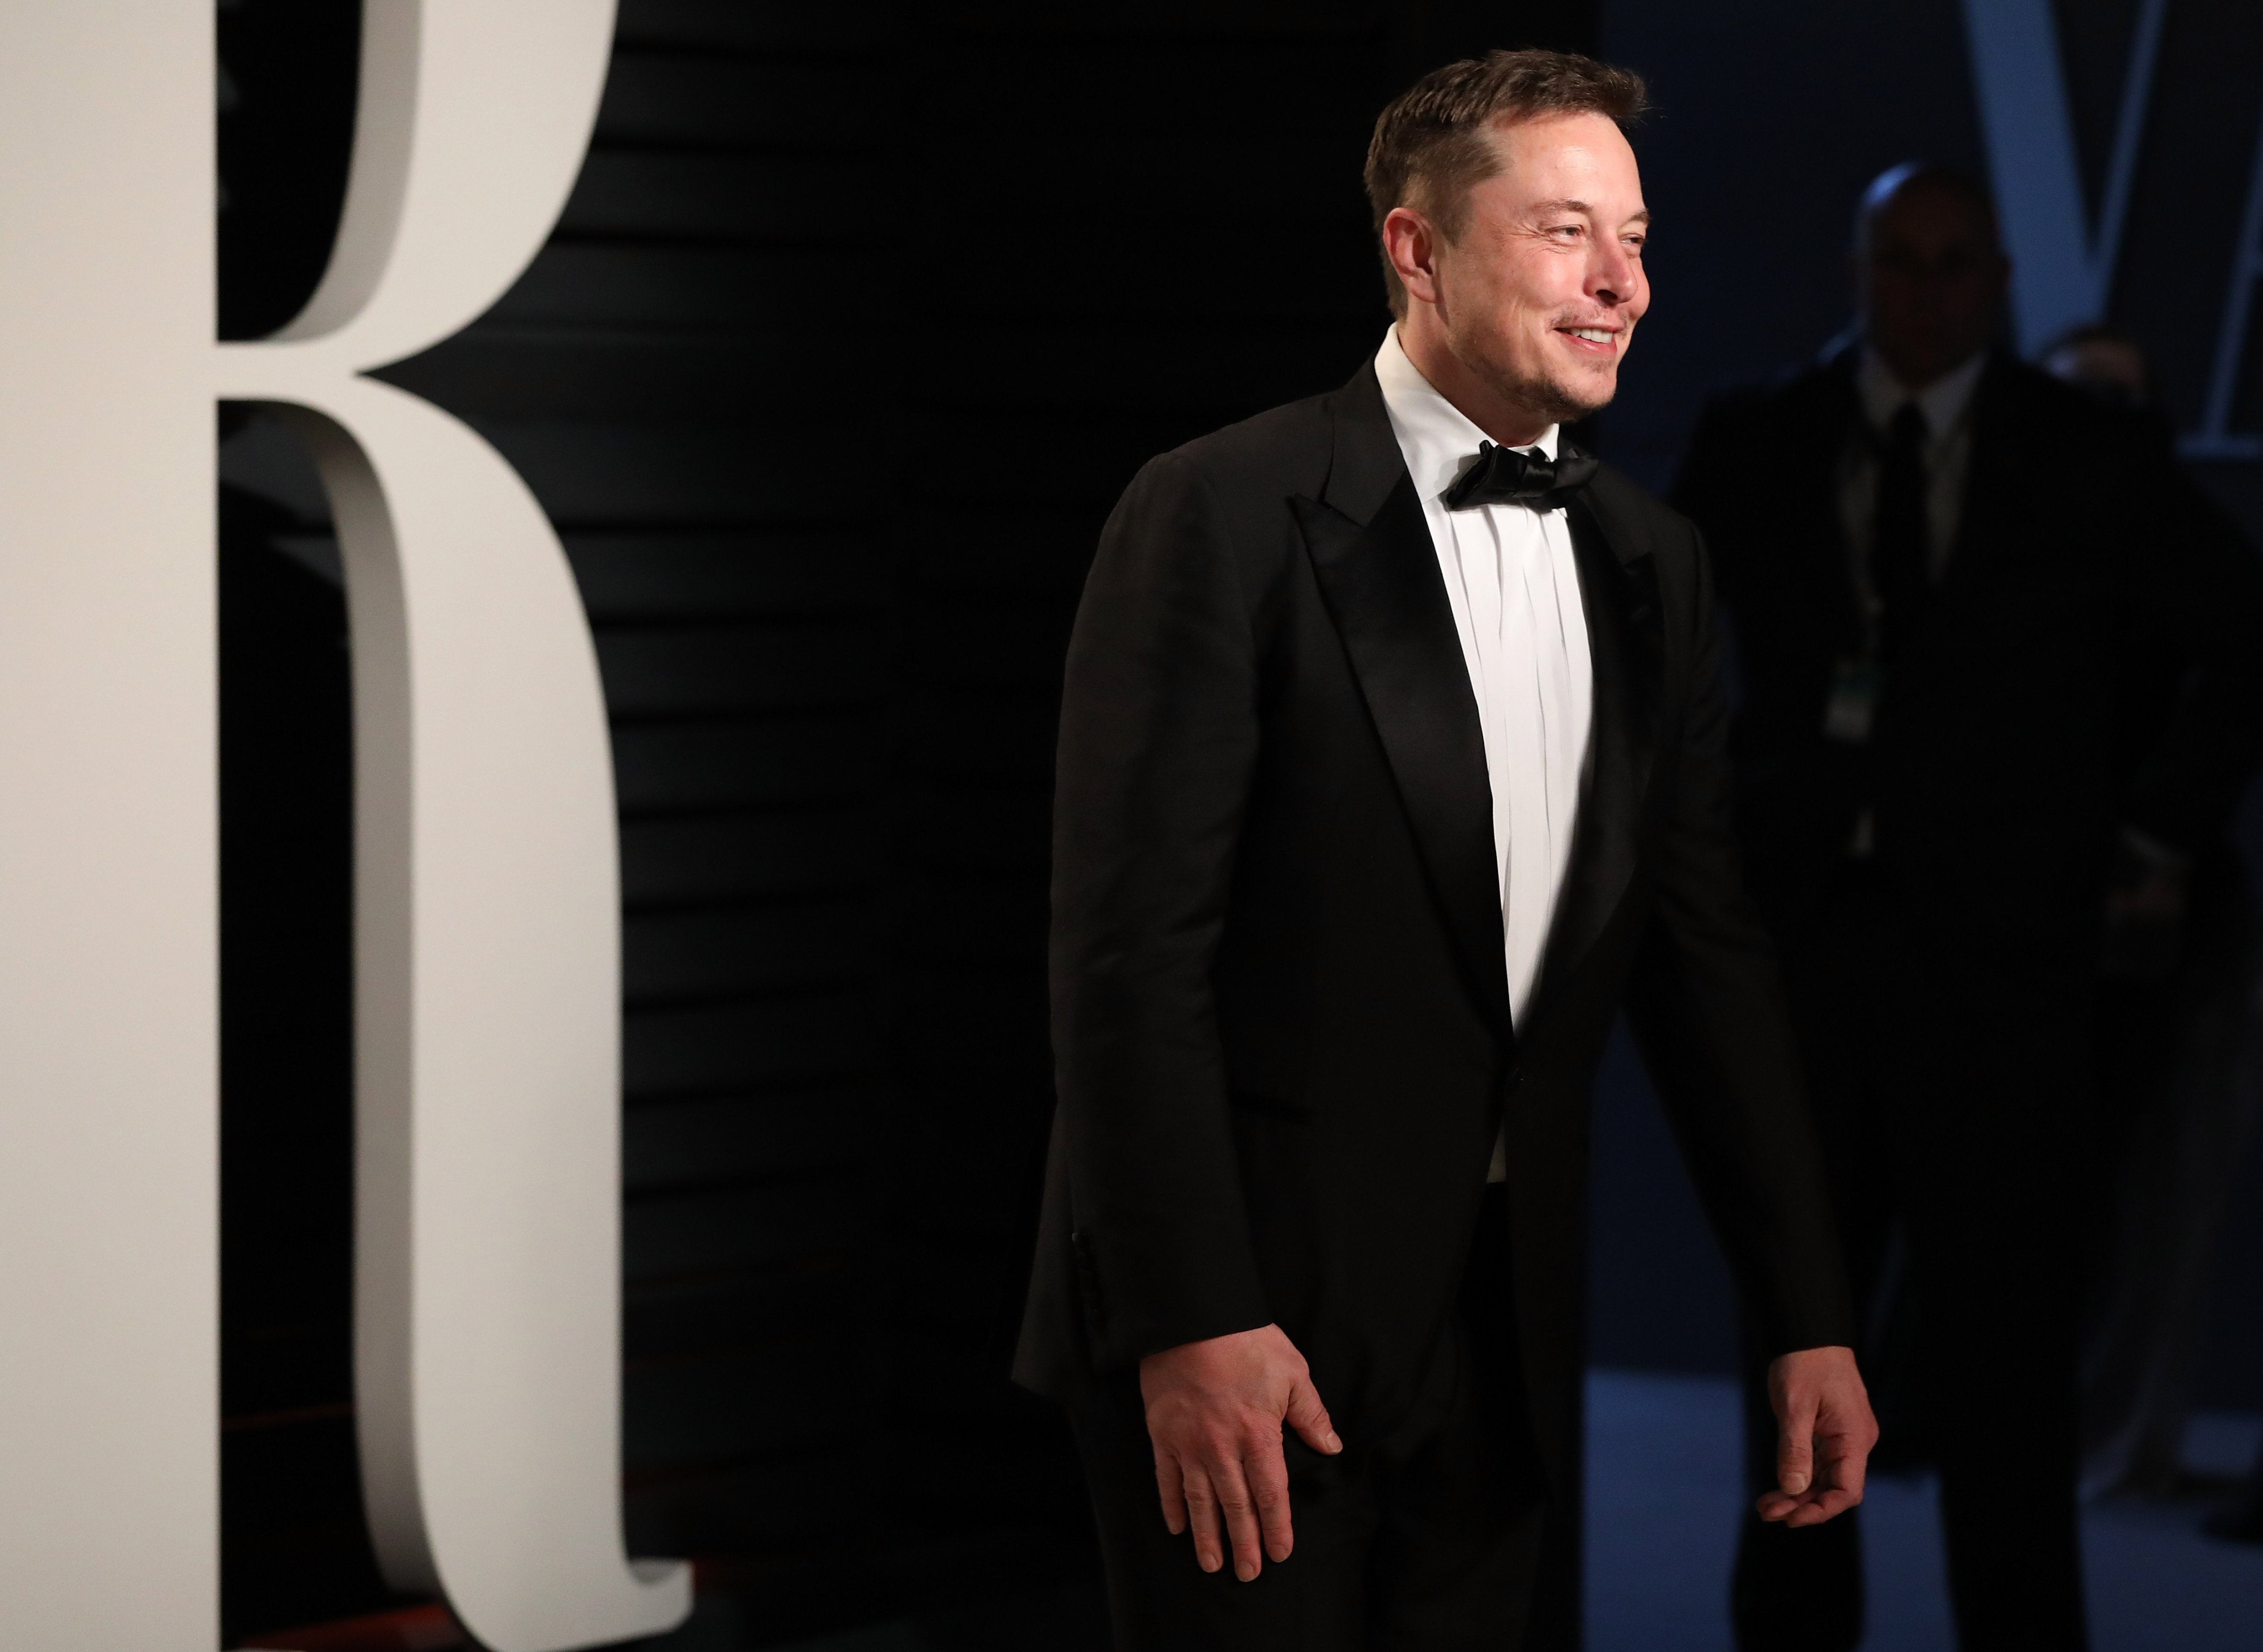 SpaceX CEO Elon Musk attends 2017 Vanity Fair Oscar Party Hosted By Graydon Carter  at Wallis Annenberg Center for the Performing Arts on February 26, 2017 in Beverly Hills, California.